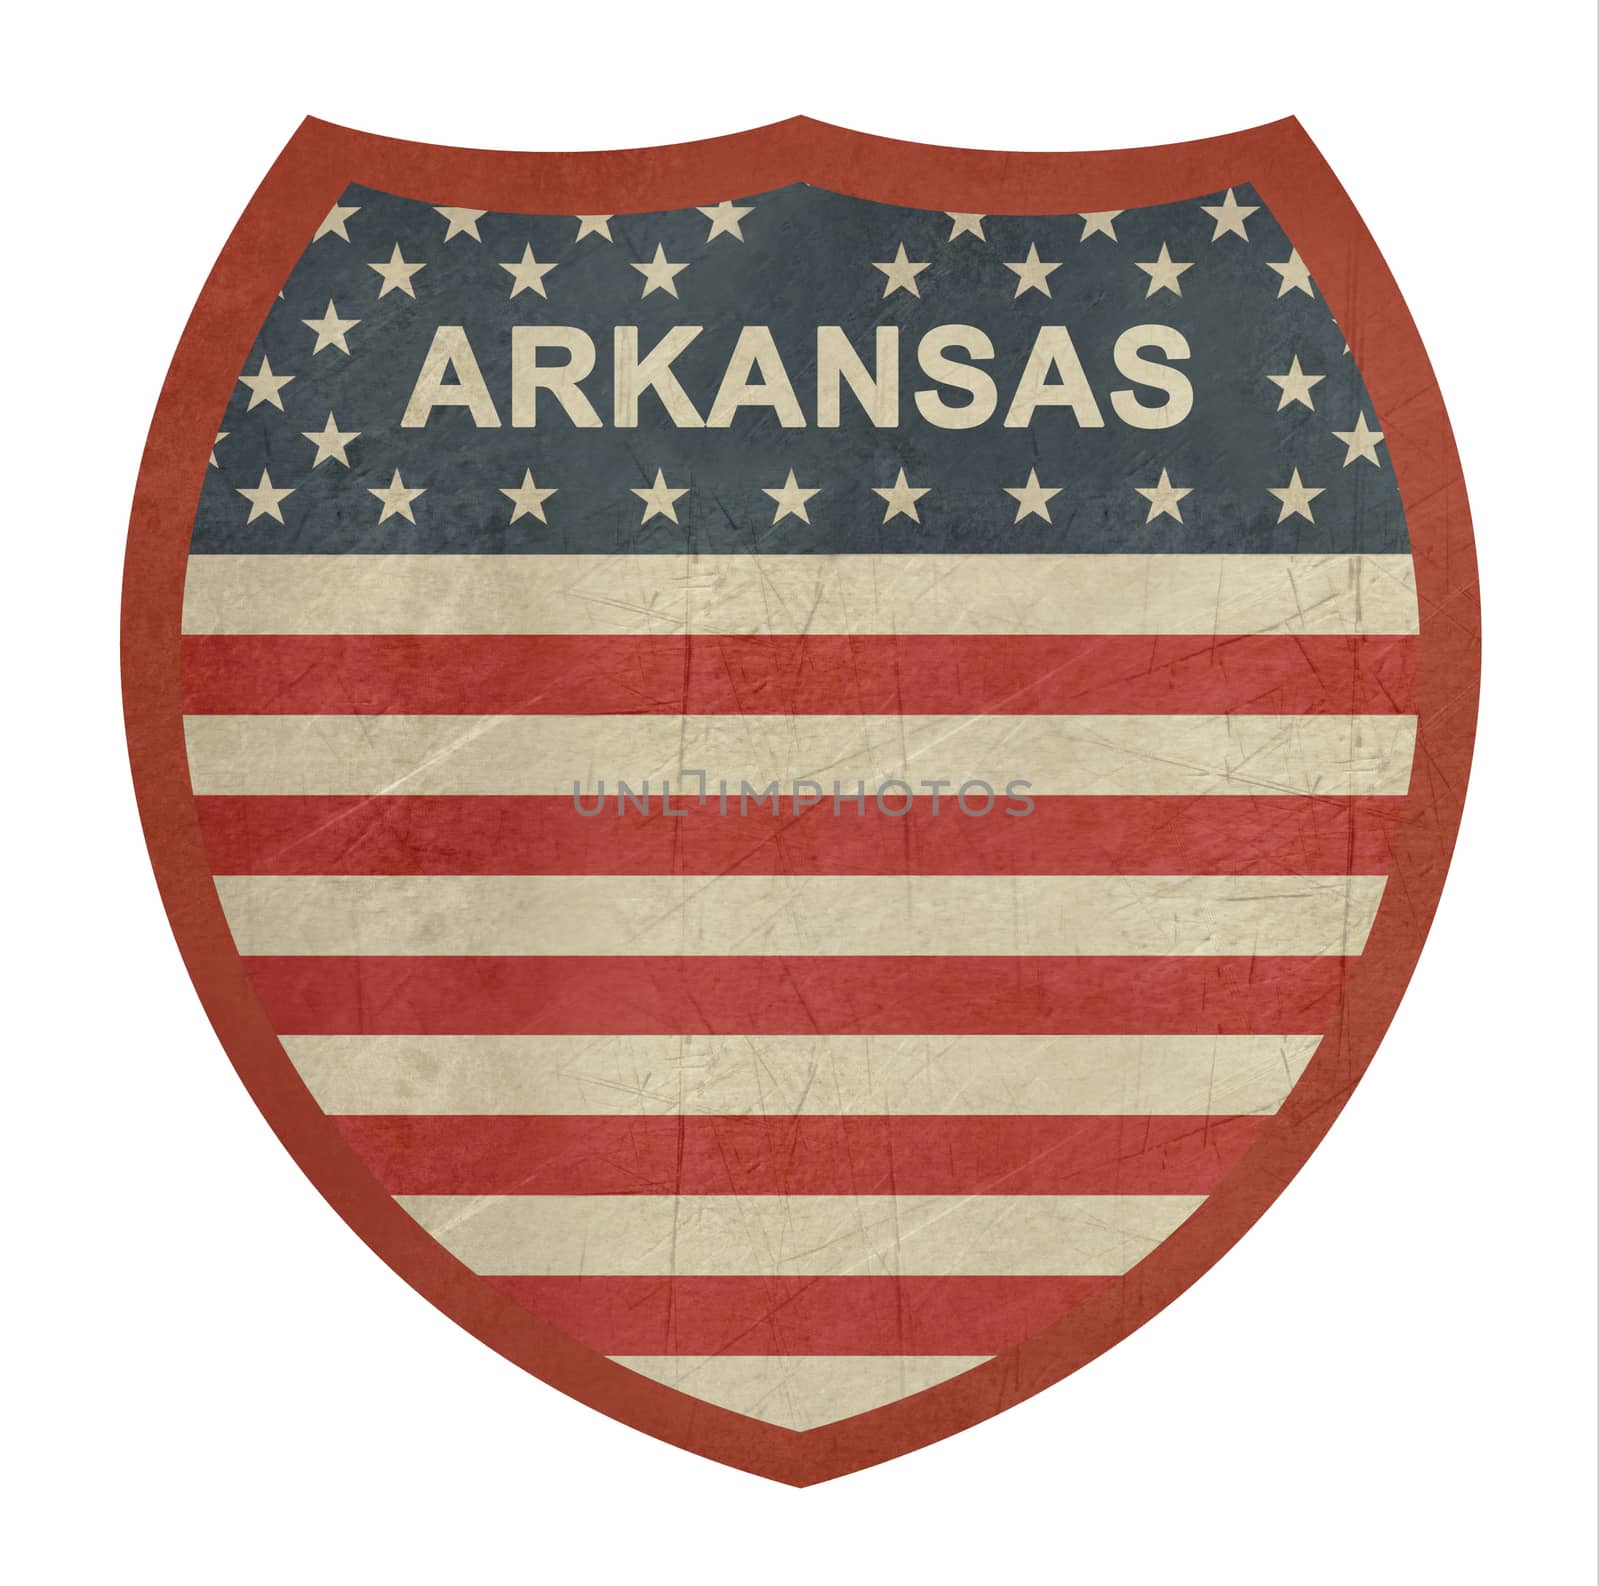 Grunge Arkansas American interstate highway sign isolated on a white background.